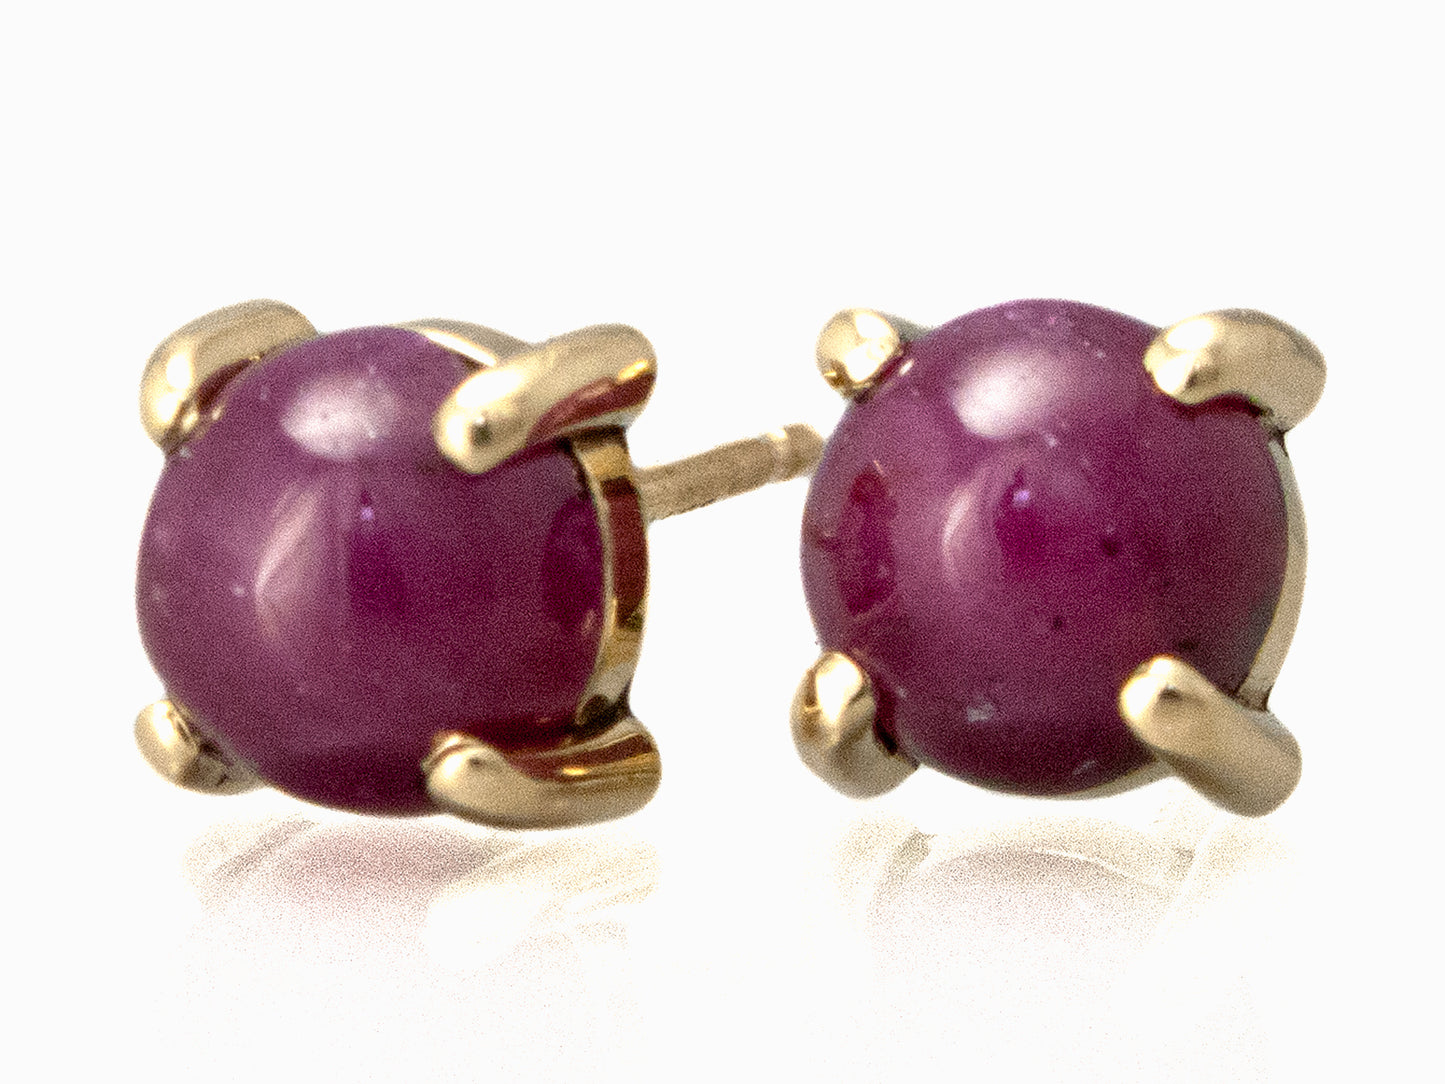 Four Prong Ruby Cabochon Studs in 14k Yellow Gold | 6 mm round natural ruby cabochon earrings